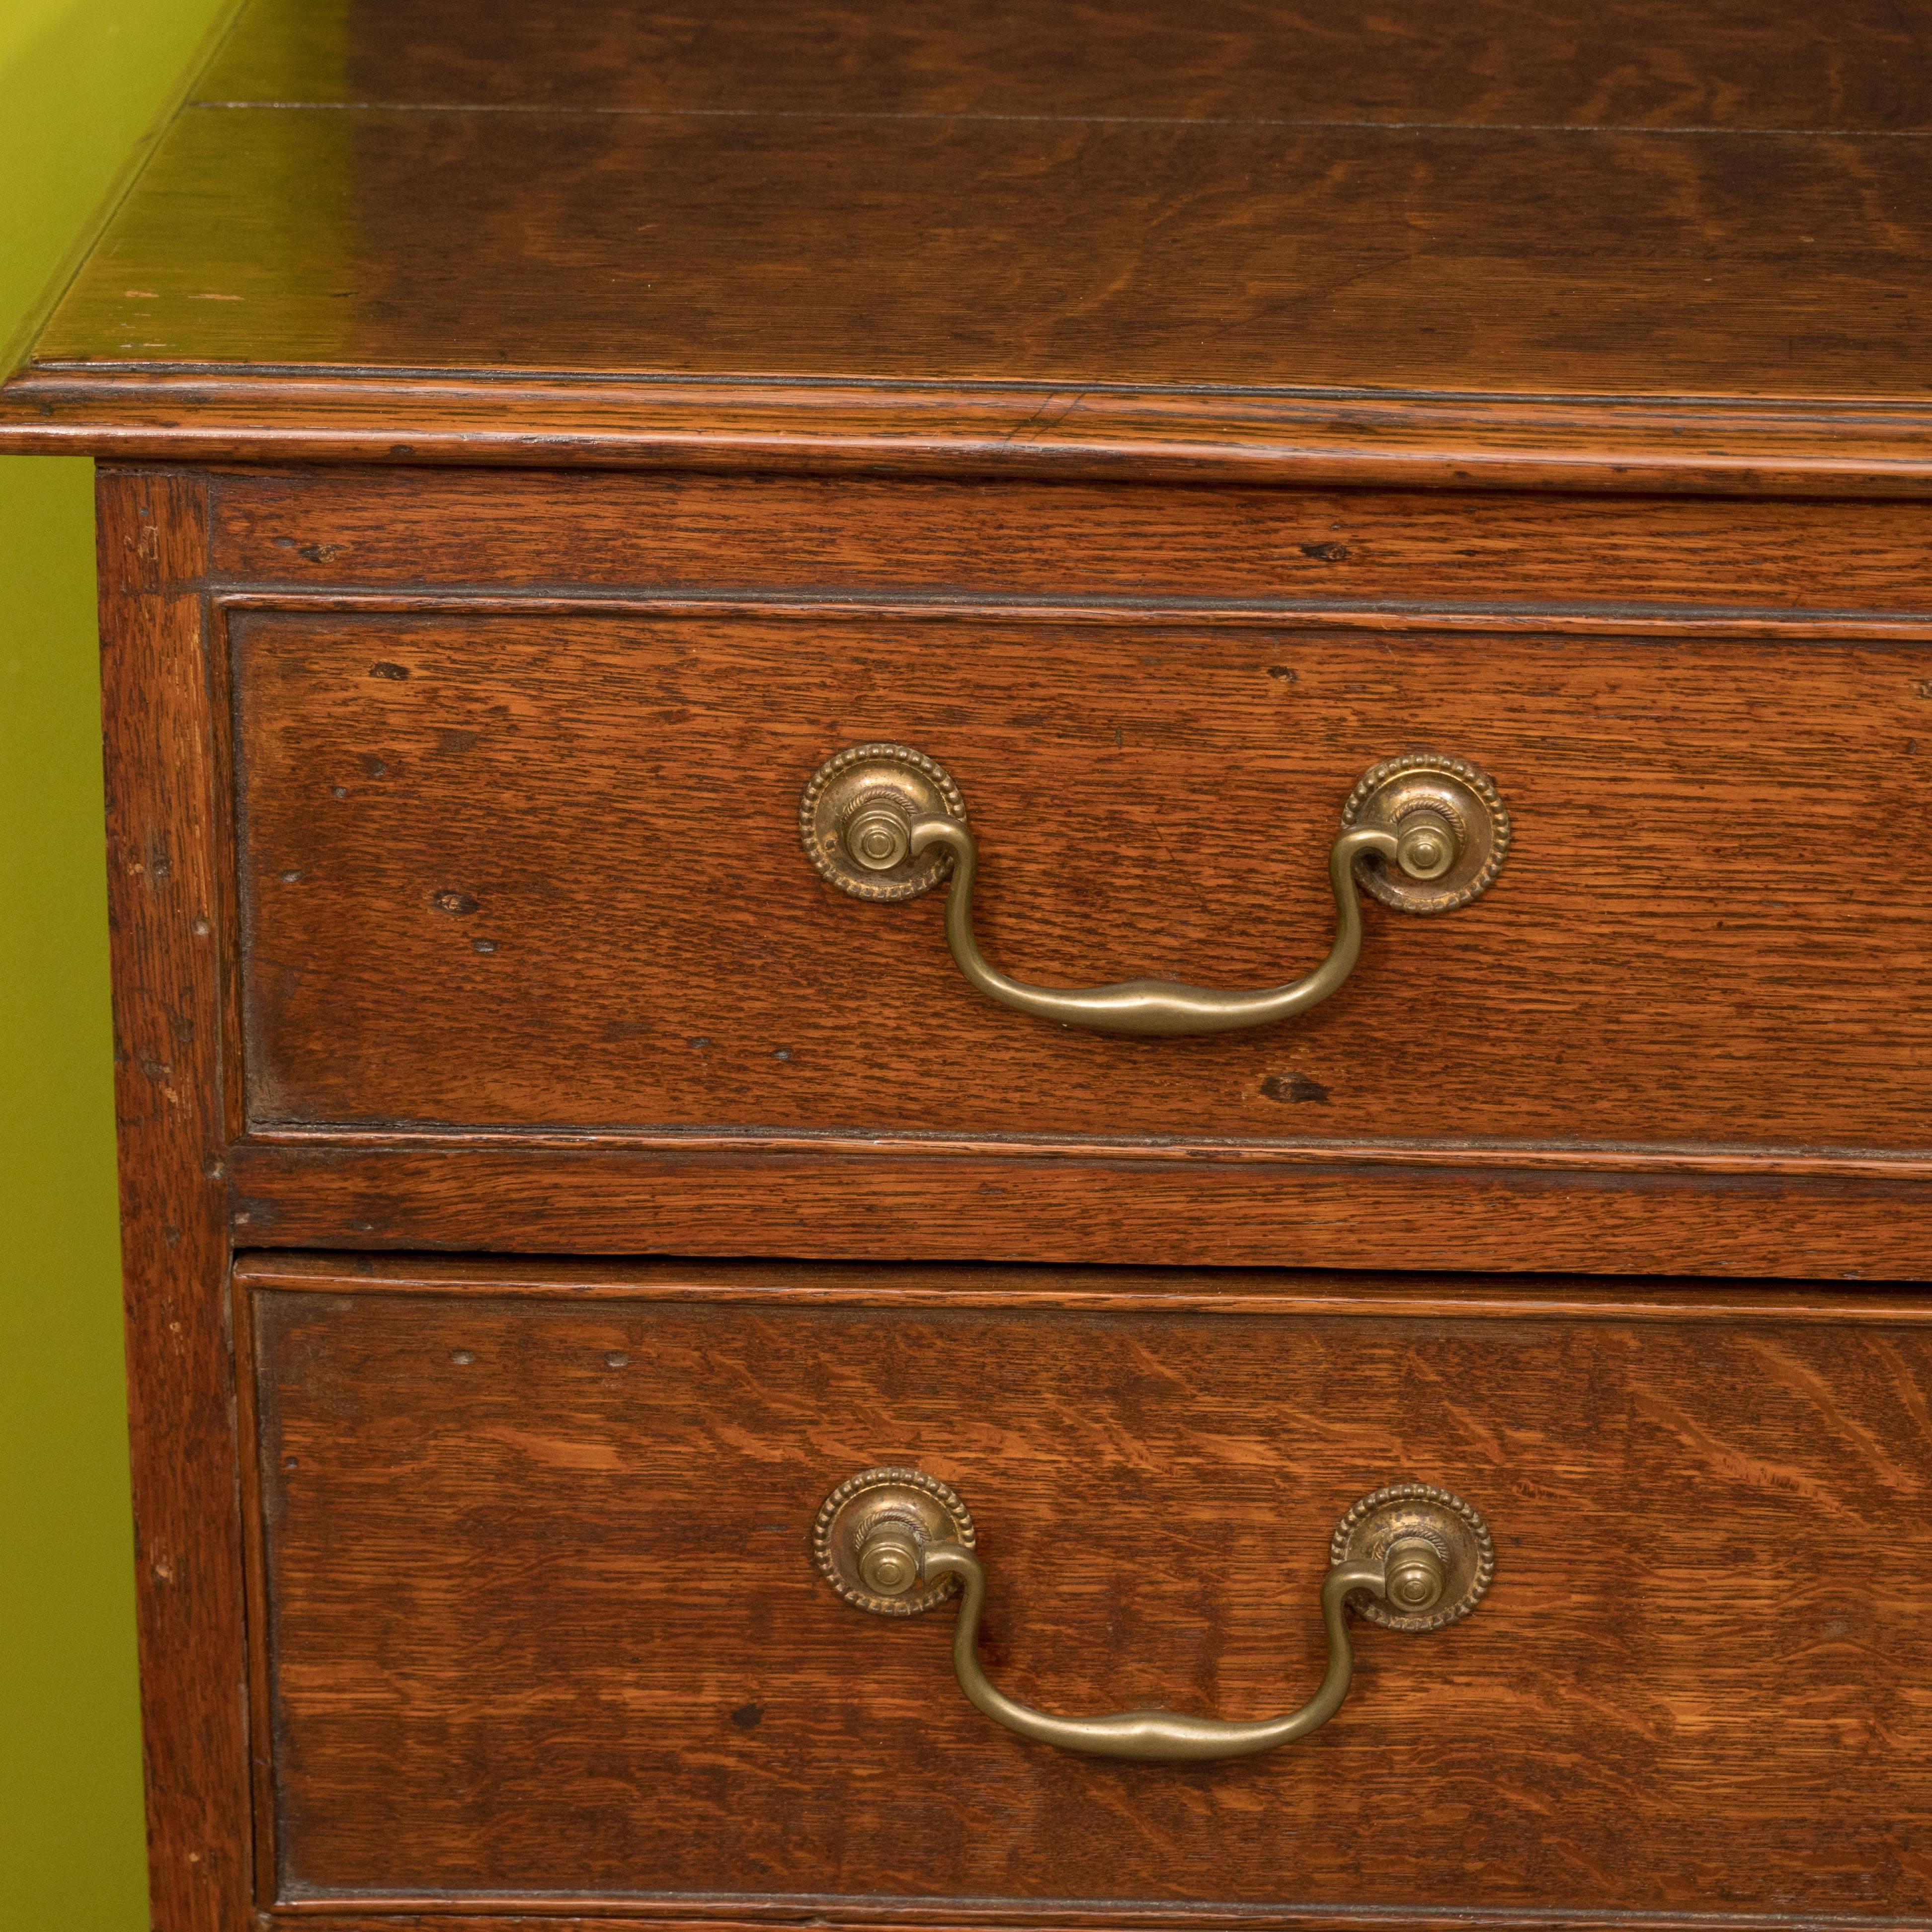 A lovely English oak chest with a hinged top and three lower drawers. The top opens to reveal a small storage compartment. The piece features brass pulls and is raised on bracket feet. The size of this chest make it quite versatile--it can serve as